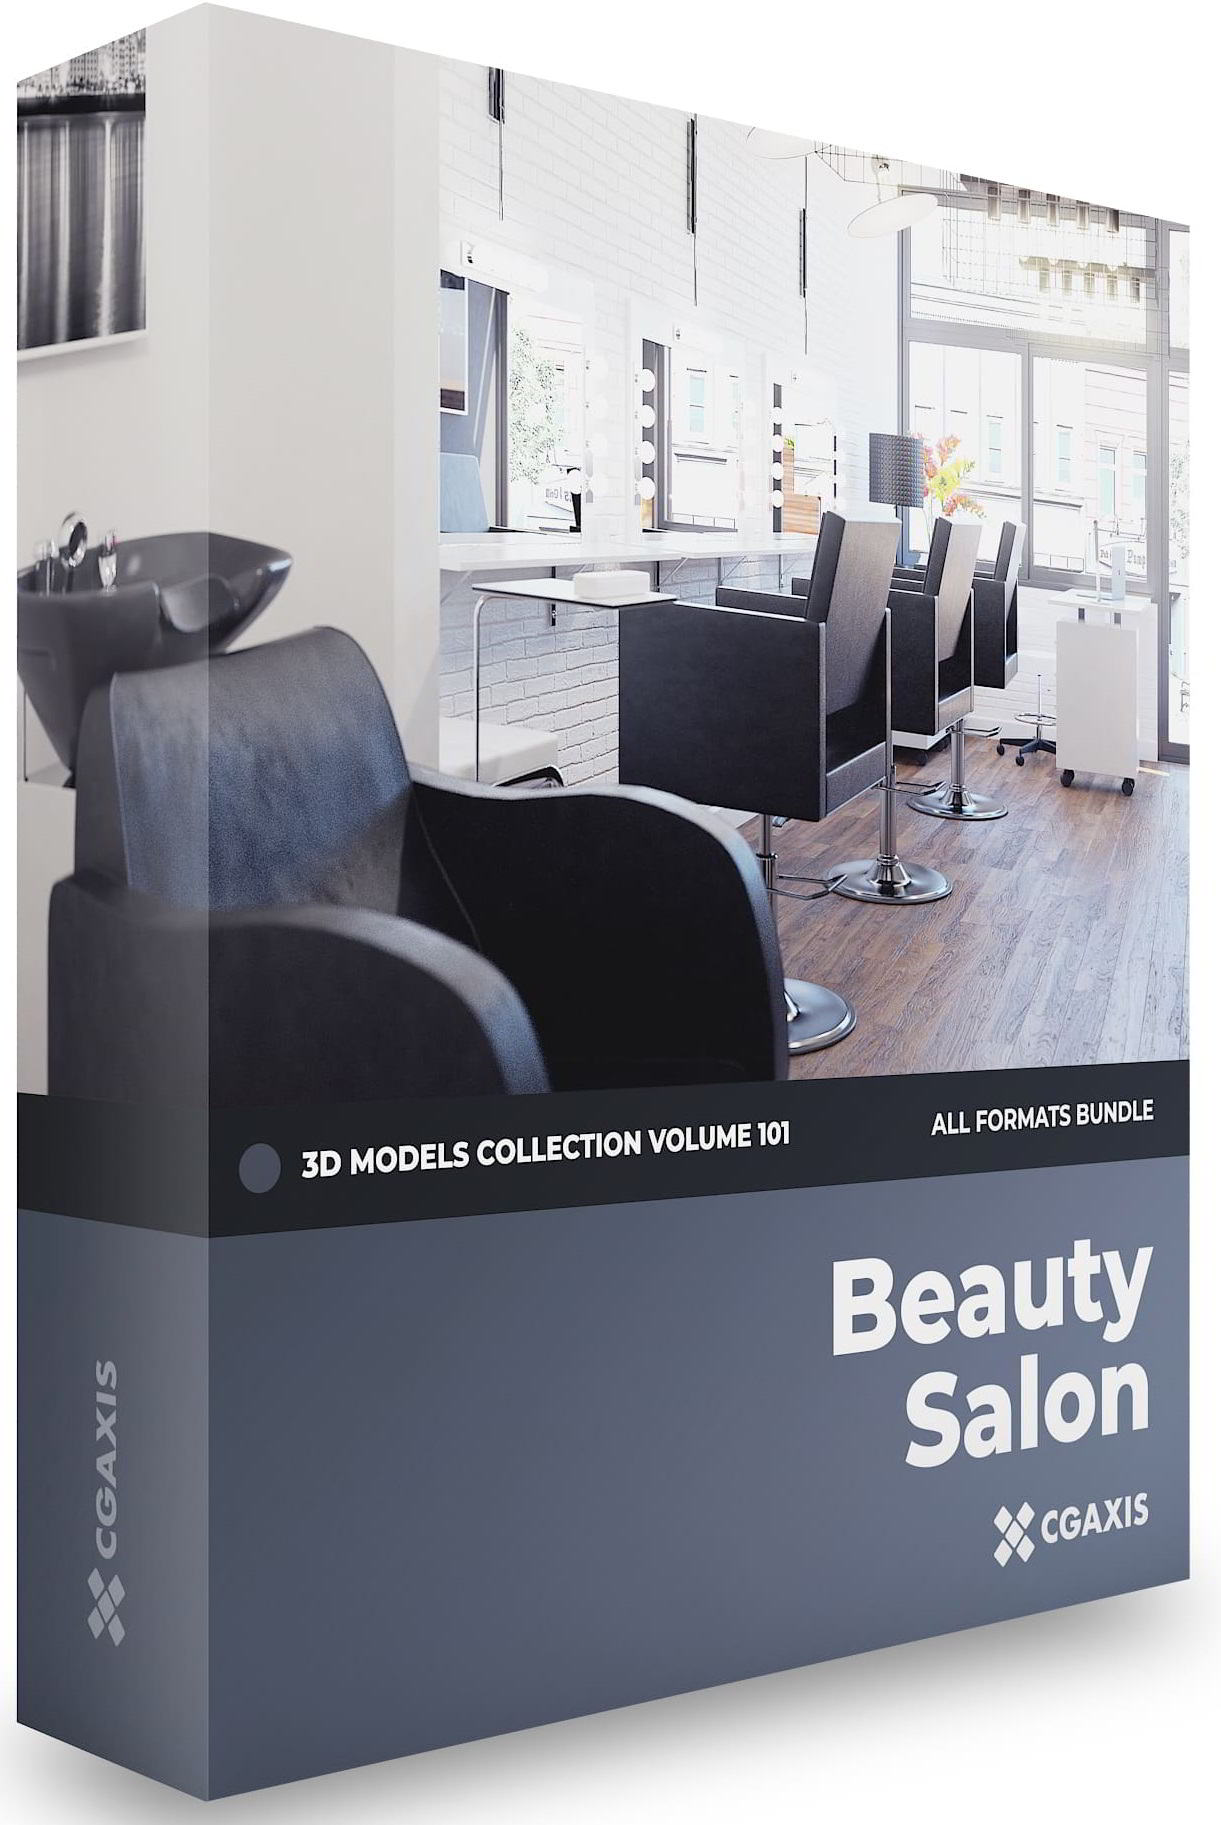 CGAxis Beauty Salon 3D Models Collection Volume 101 free download